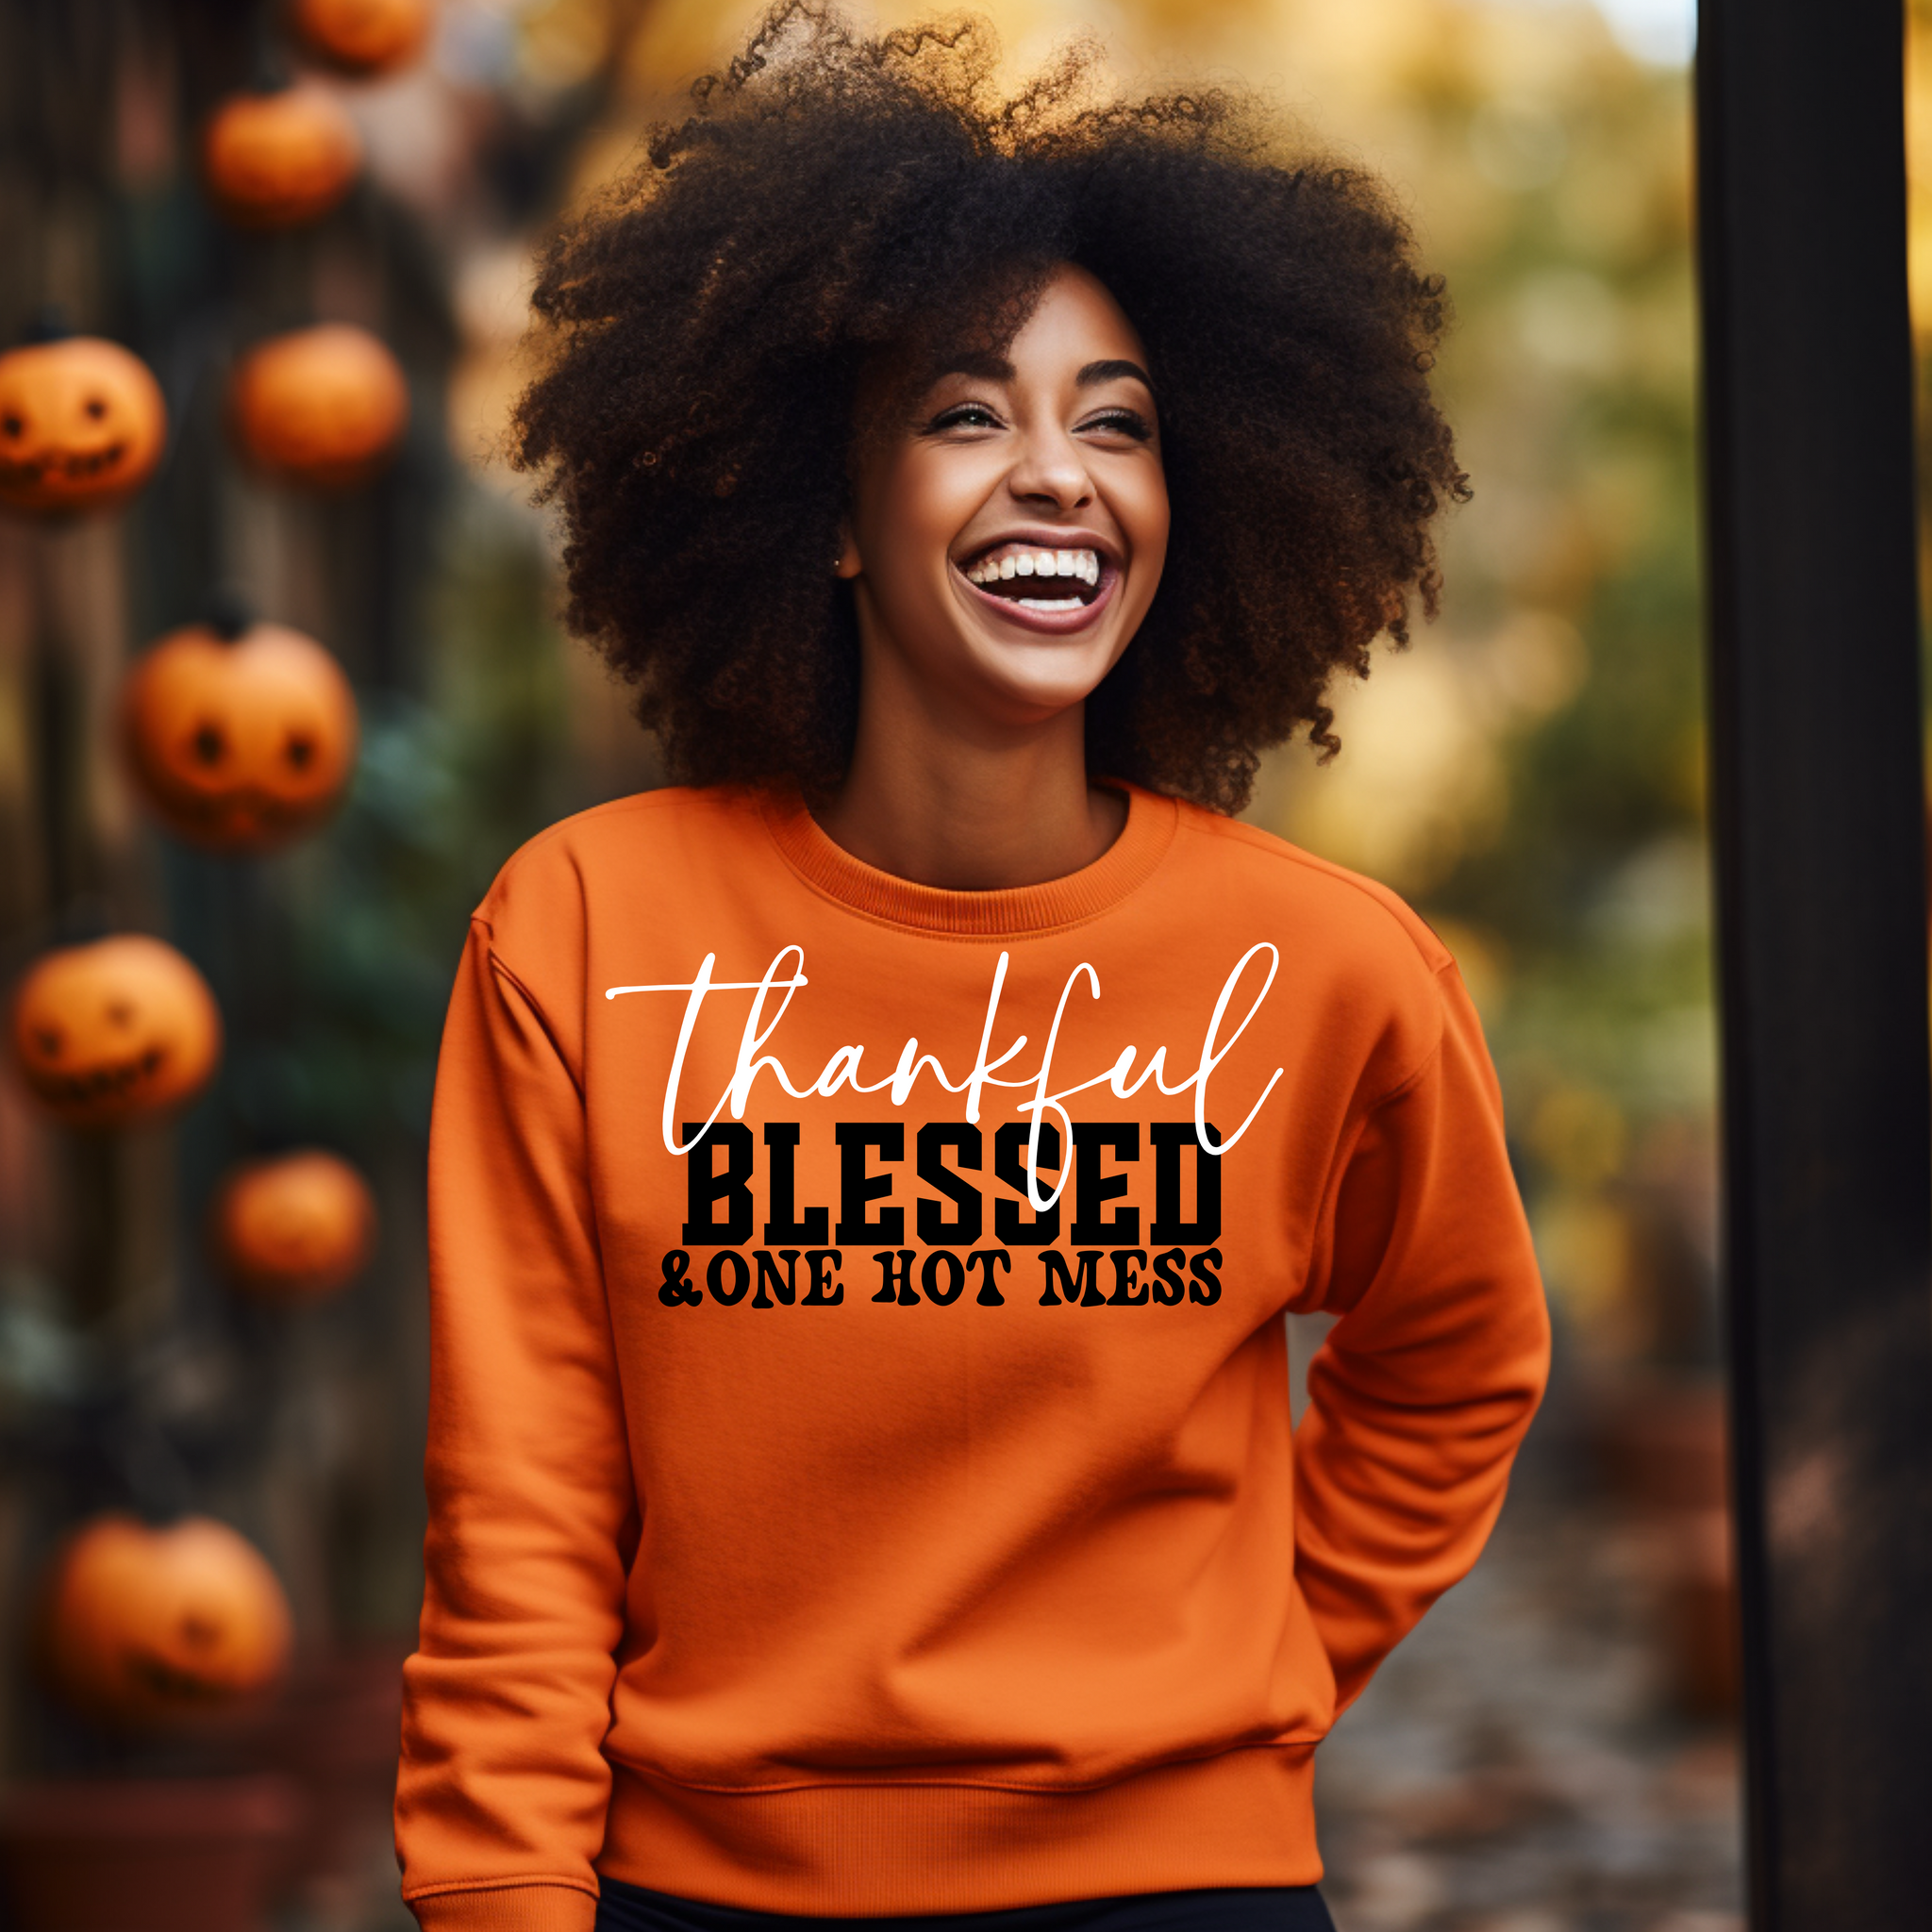 Thankful Blessed  and One Hot Mess Sweatshirt